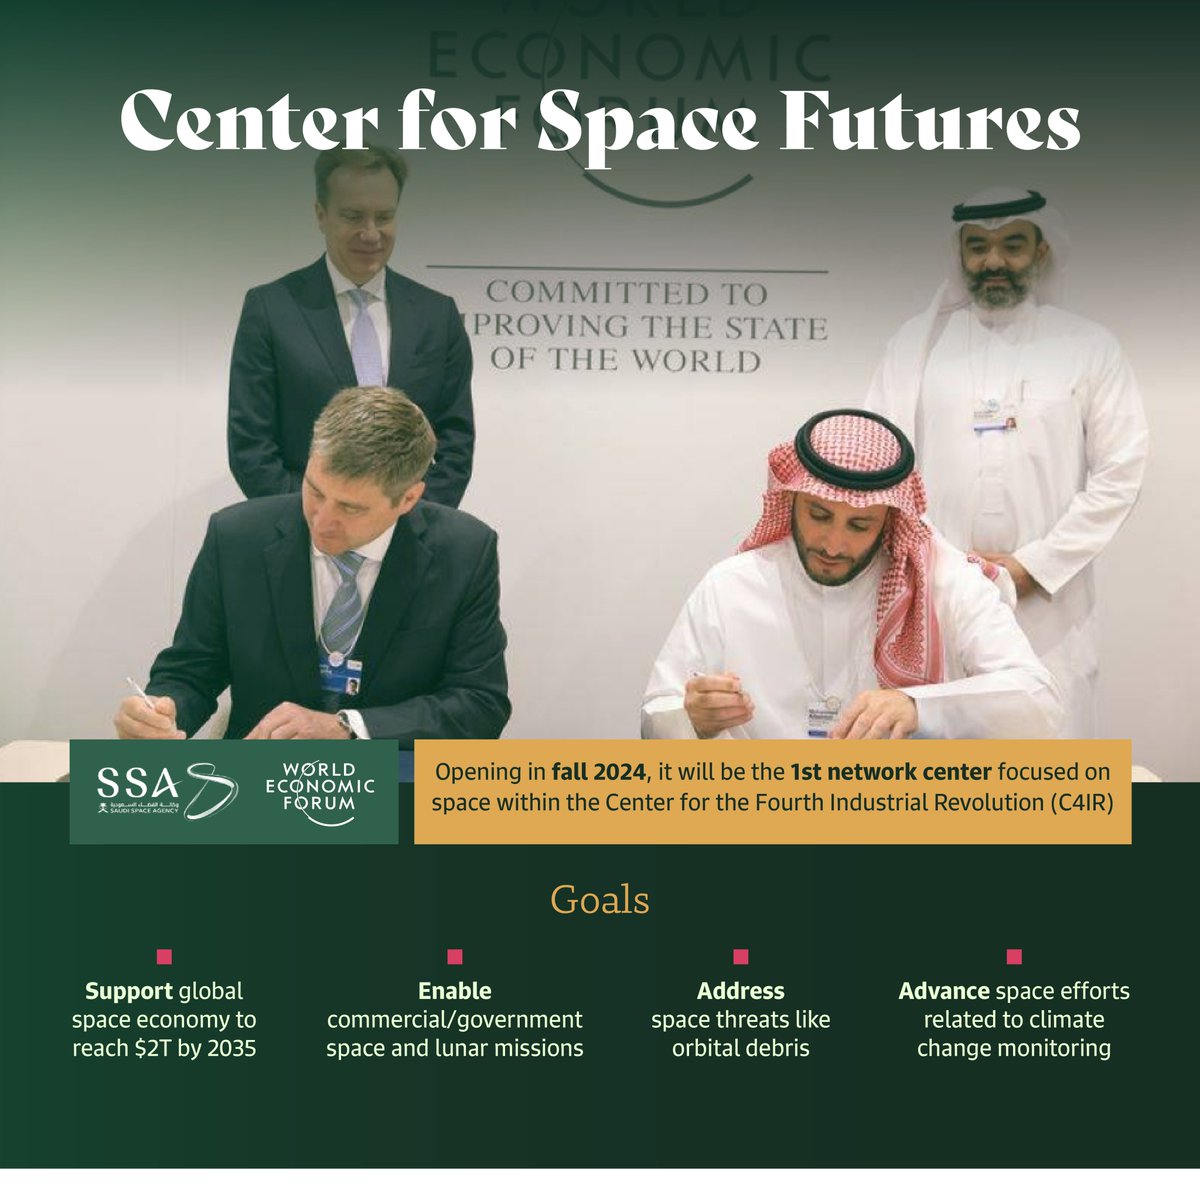 Hand in hand, #SaudiArabia and the U.S. are working on strengthening their collaboration in both the #energy and #space sectors.